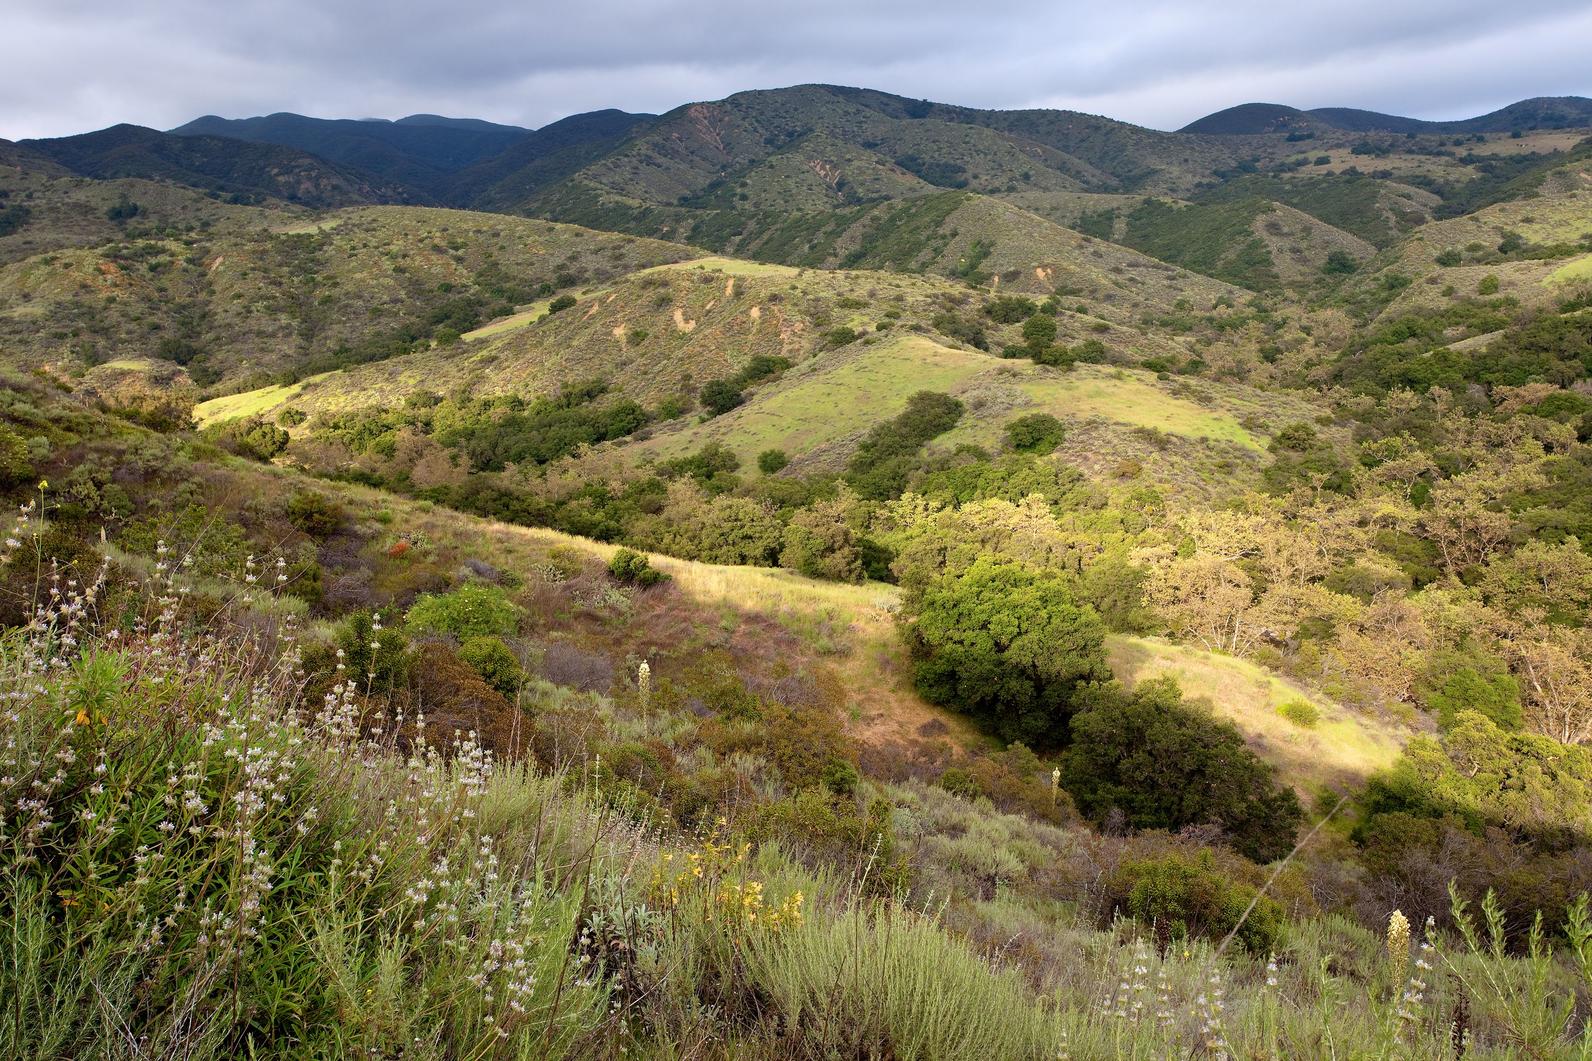 The Audubon Starr Ranch is an amazing example of wild Southern California.